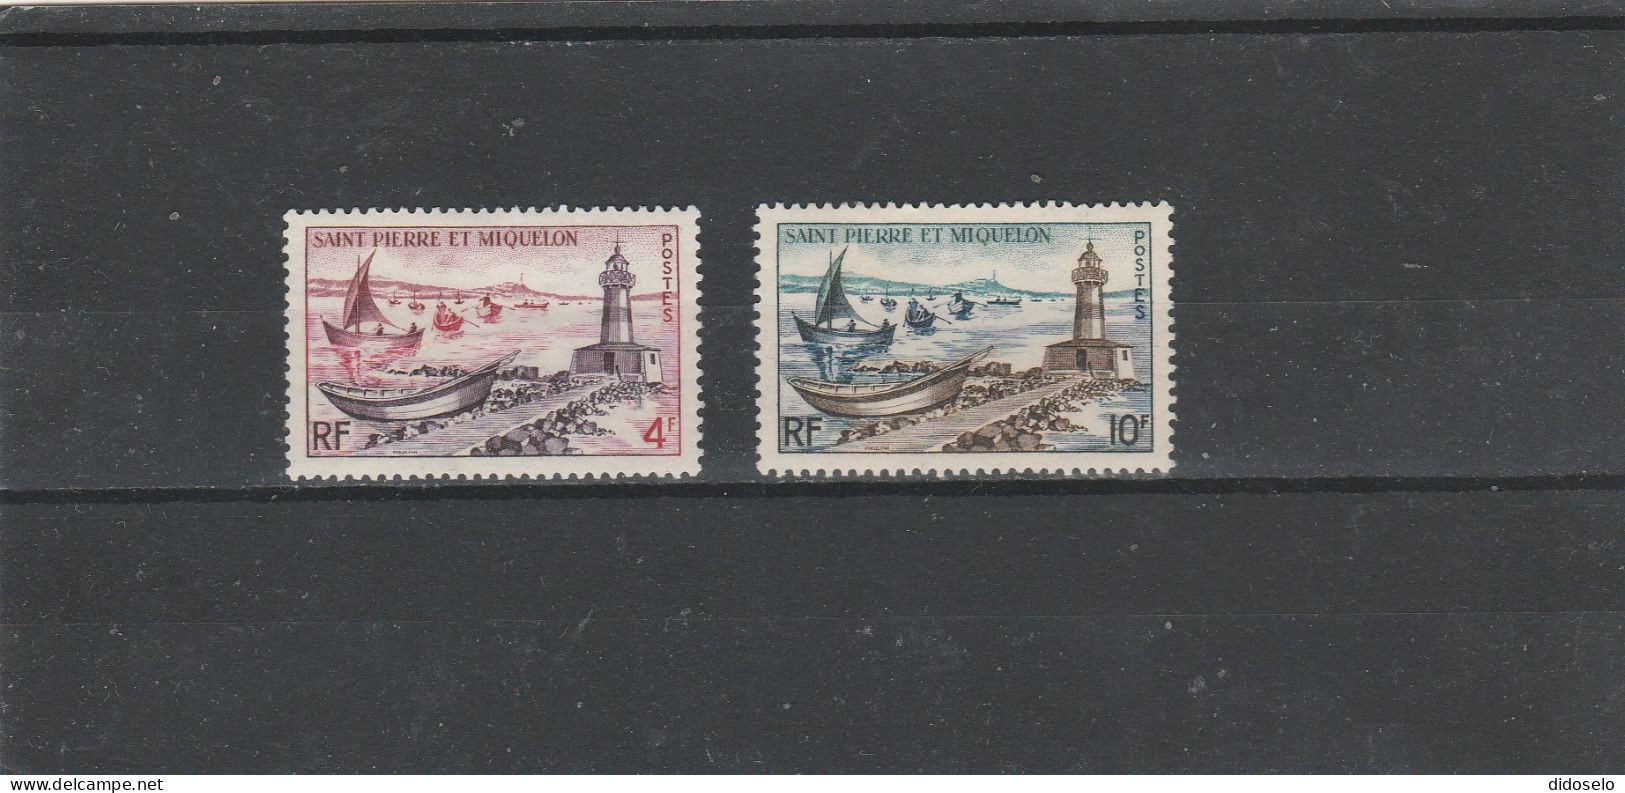 SP&M - 1957 -  MNH(**) Pointe Aux Canons Lighthouse - Faros